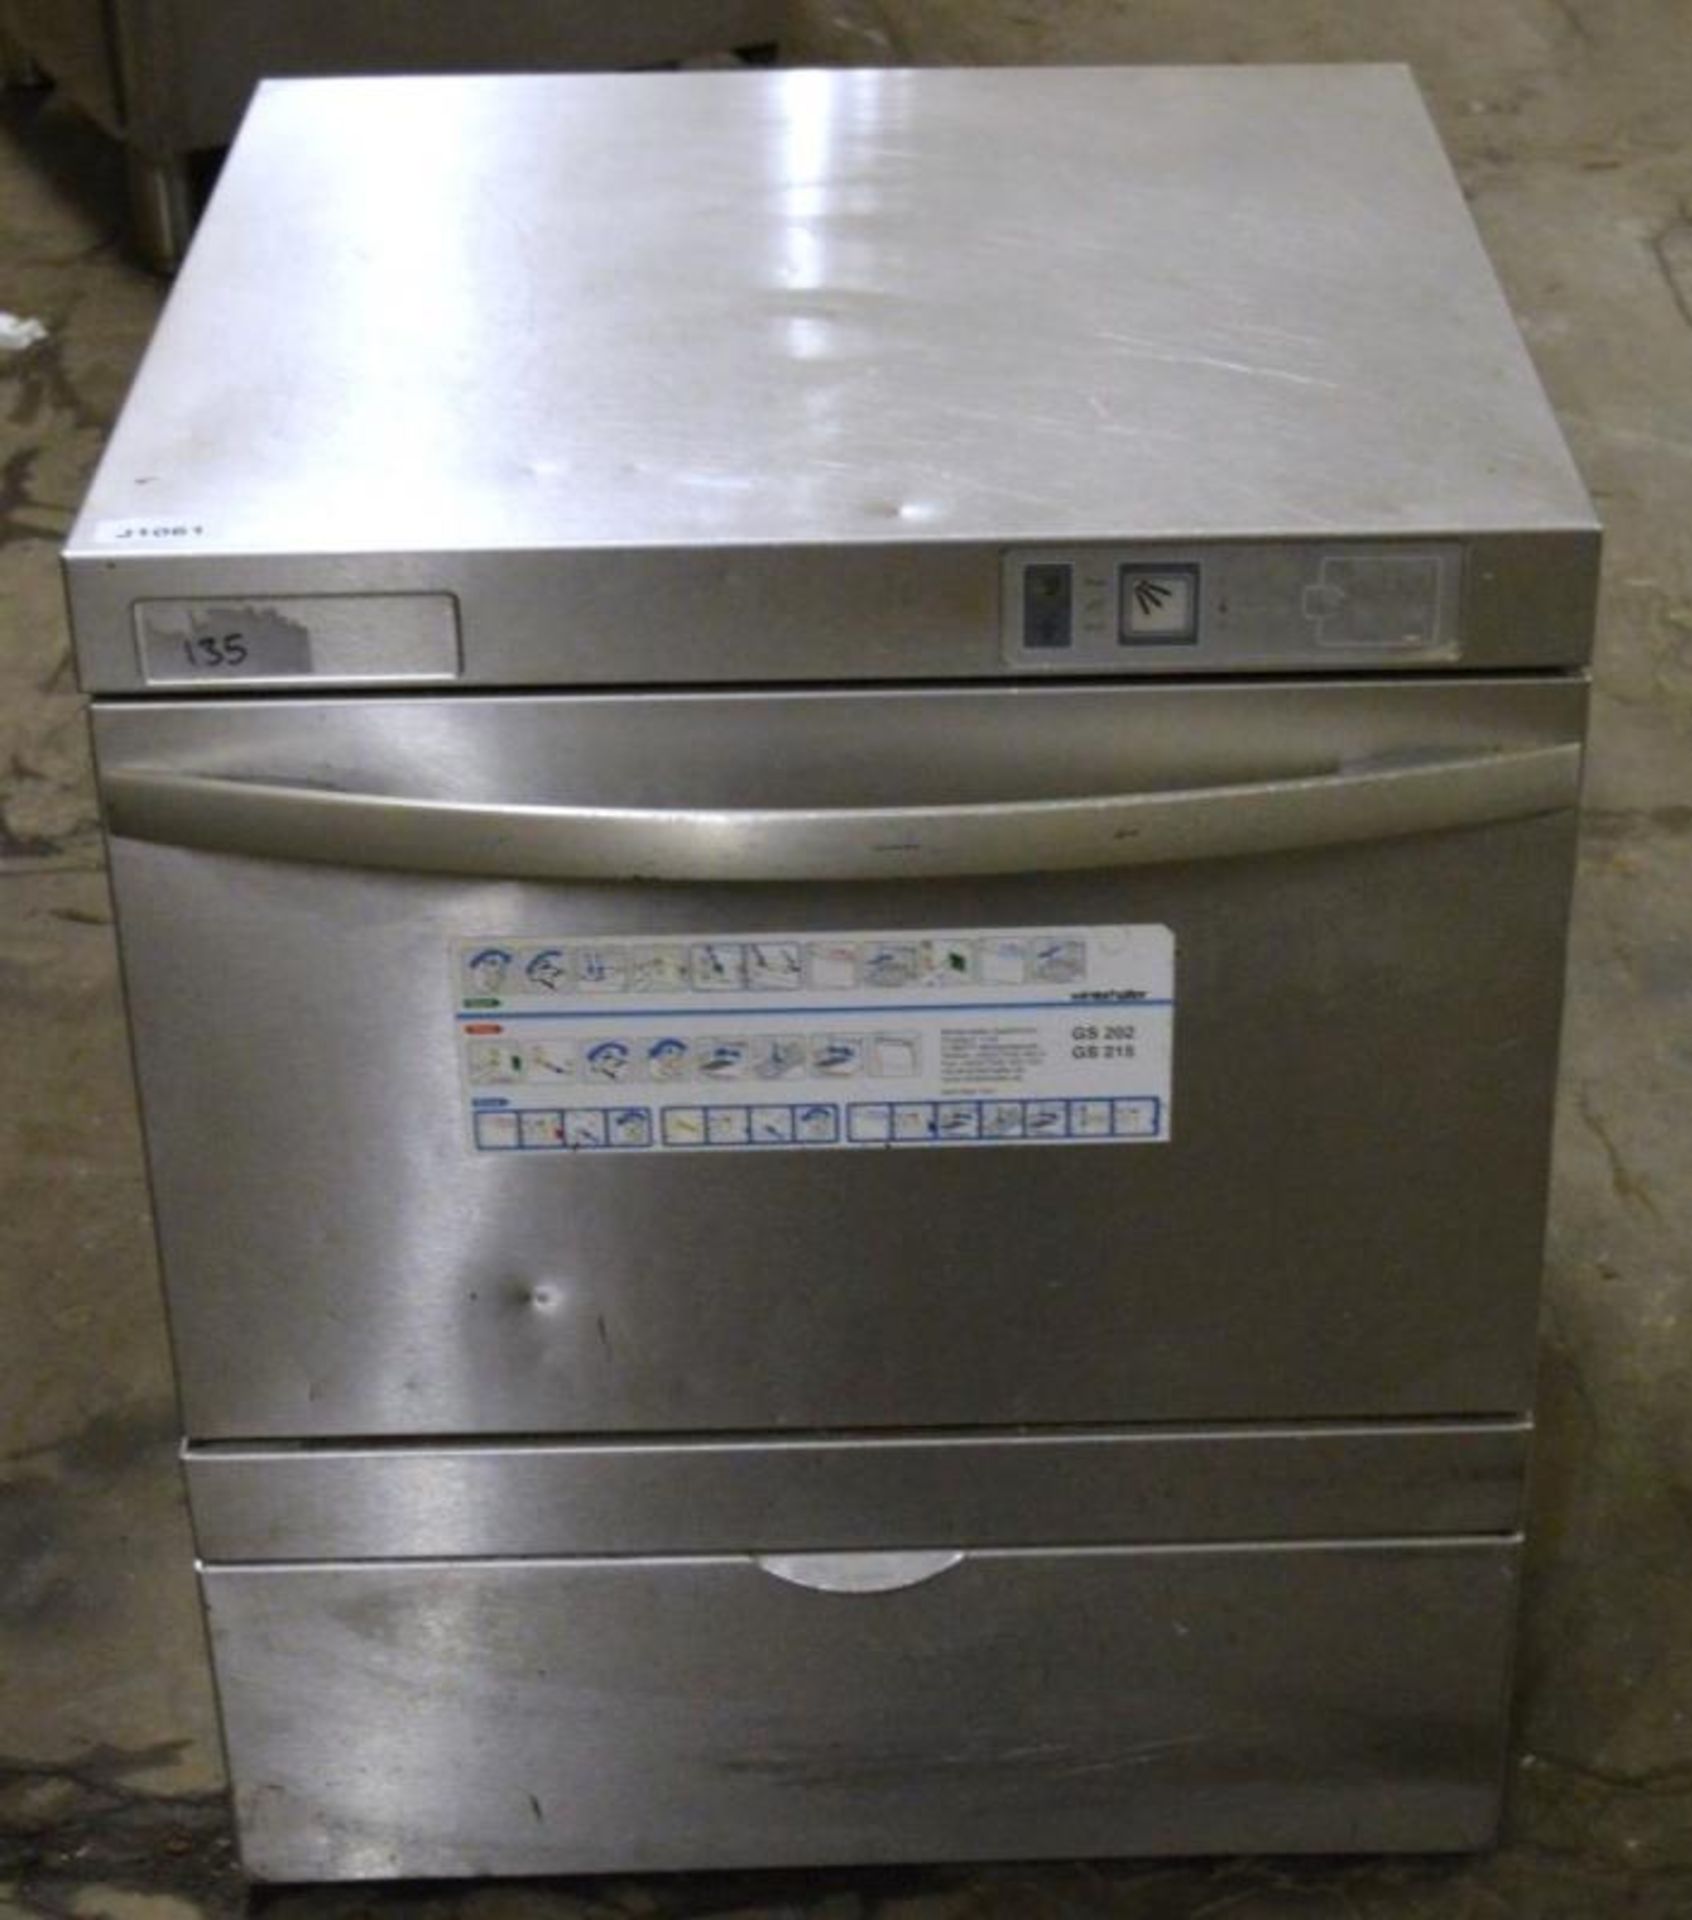 1 x Winterhalter GS Undercounter Commercial Dish Washer - Stainless Steel - 3 Phase - H70 x W60 x D6 - Image 3 of 4